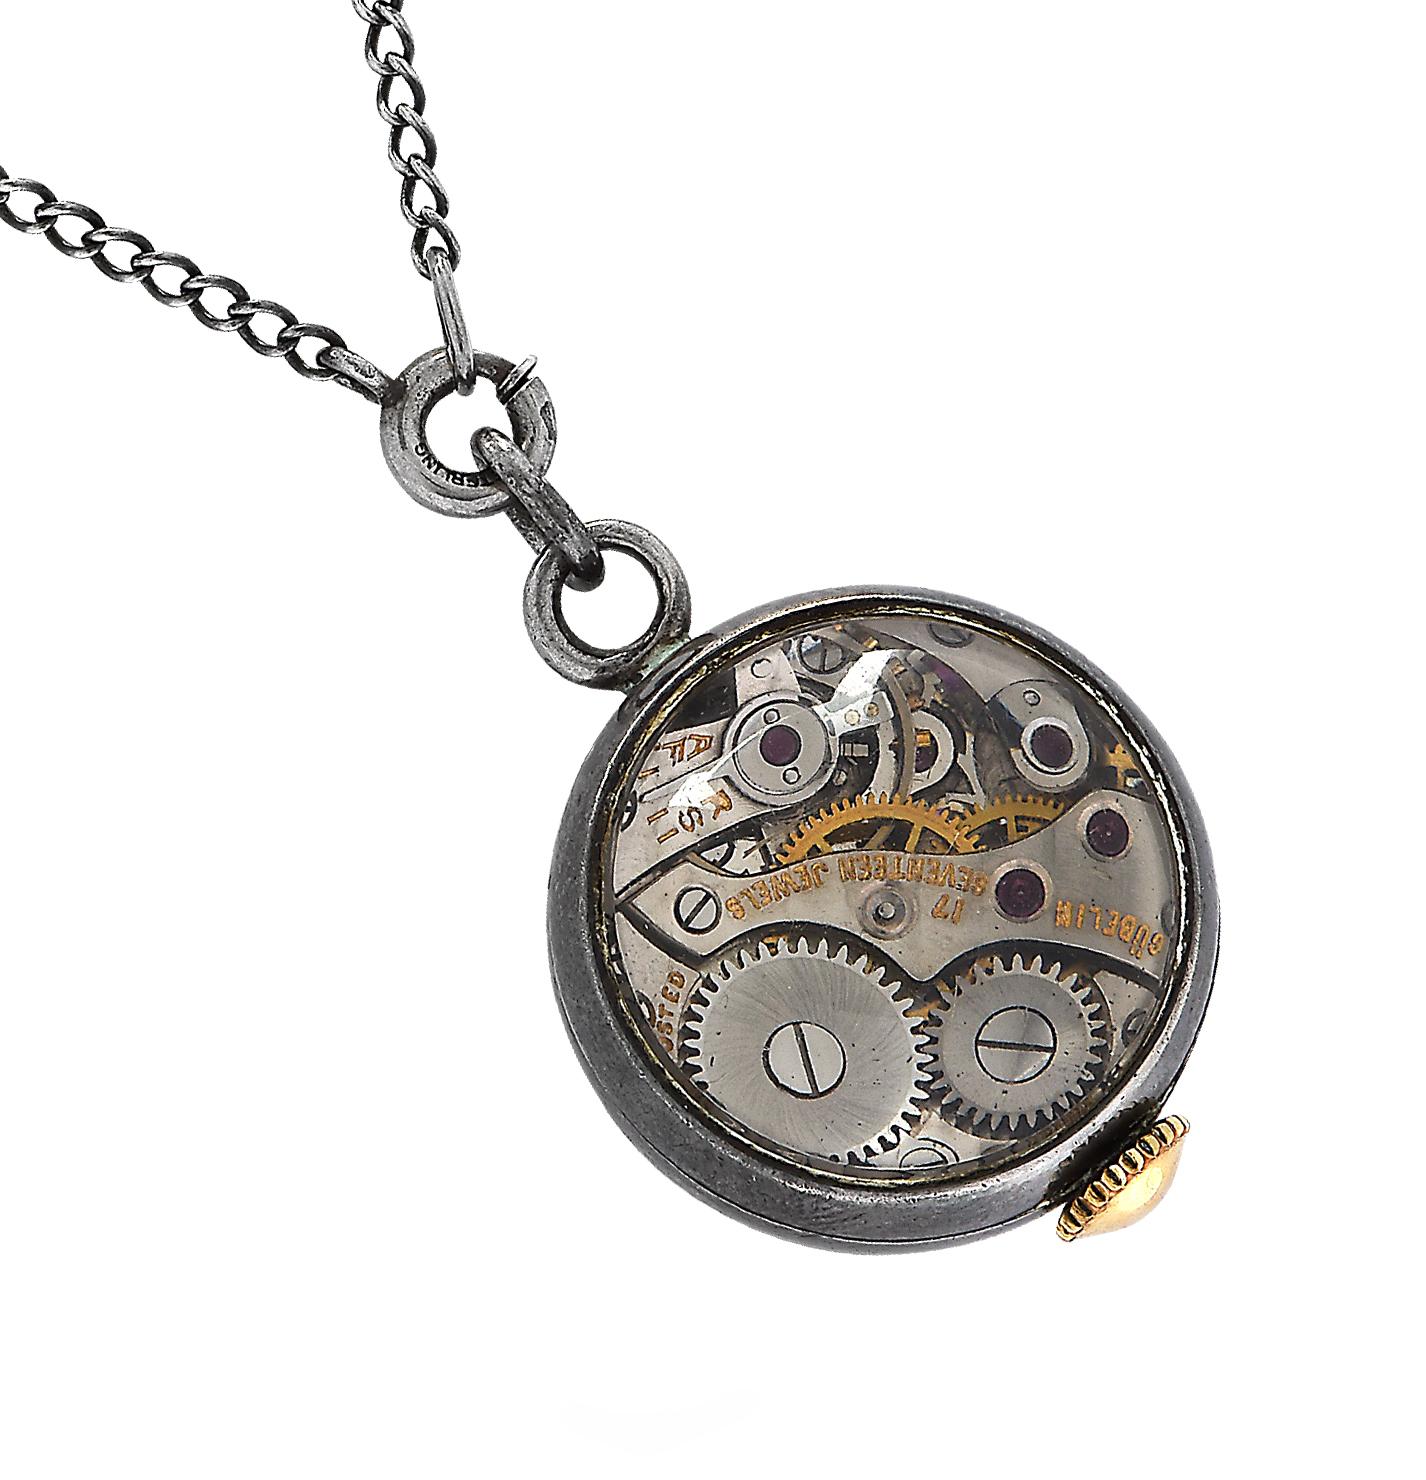 Ladies manual wind Gubelin watch with 17 jewels and a museum back suspended from a 18.5 inch sterling silver chain. 

Our pieces are all accompanied by an appraisal performed by one of our in-house GIA Graduates. They are also accompanied by GIA